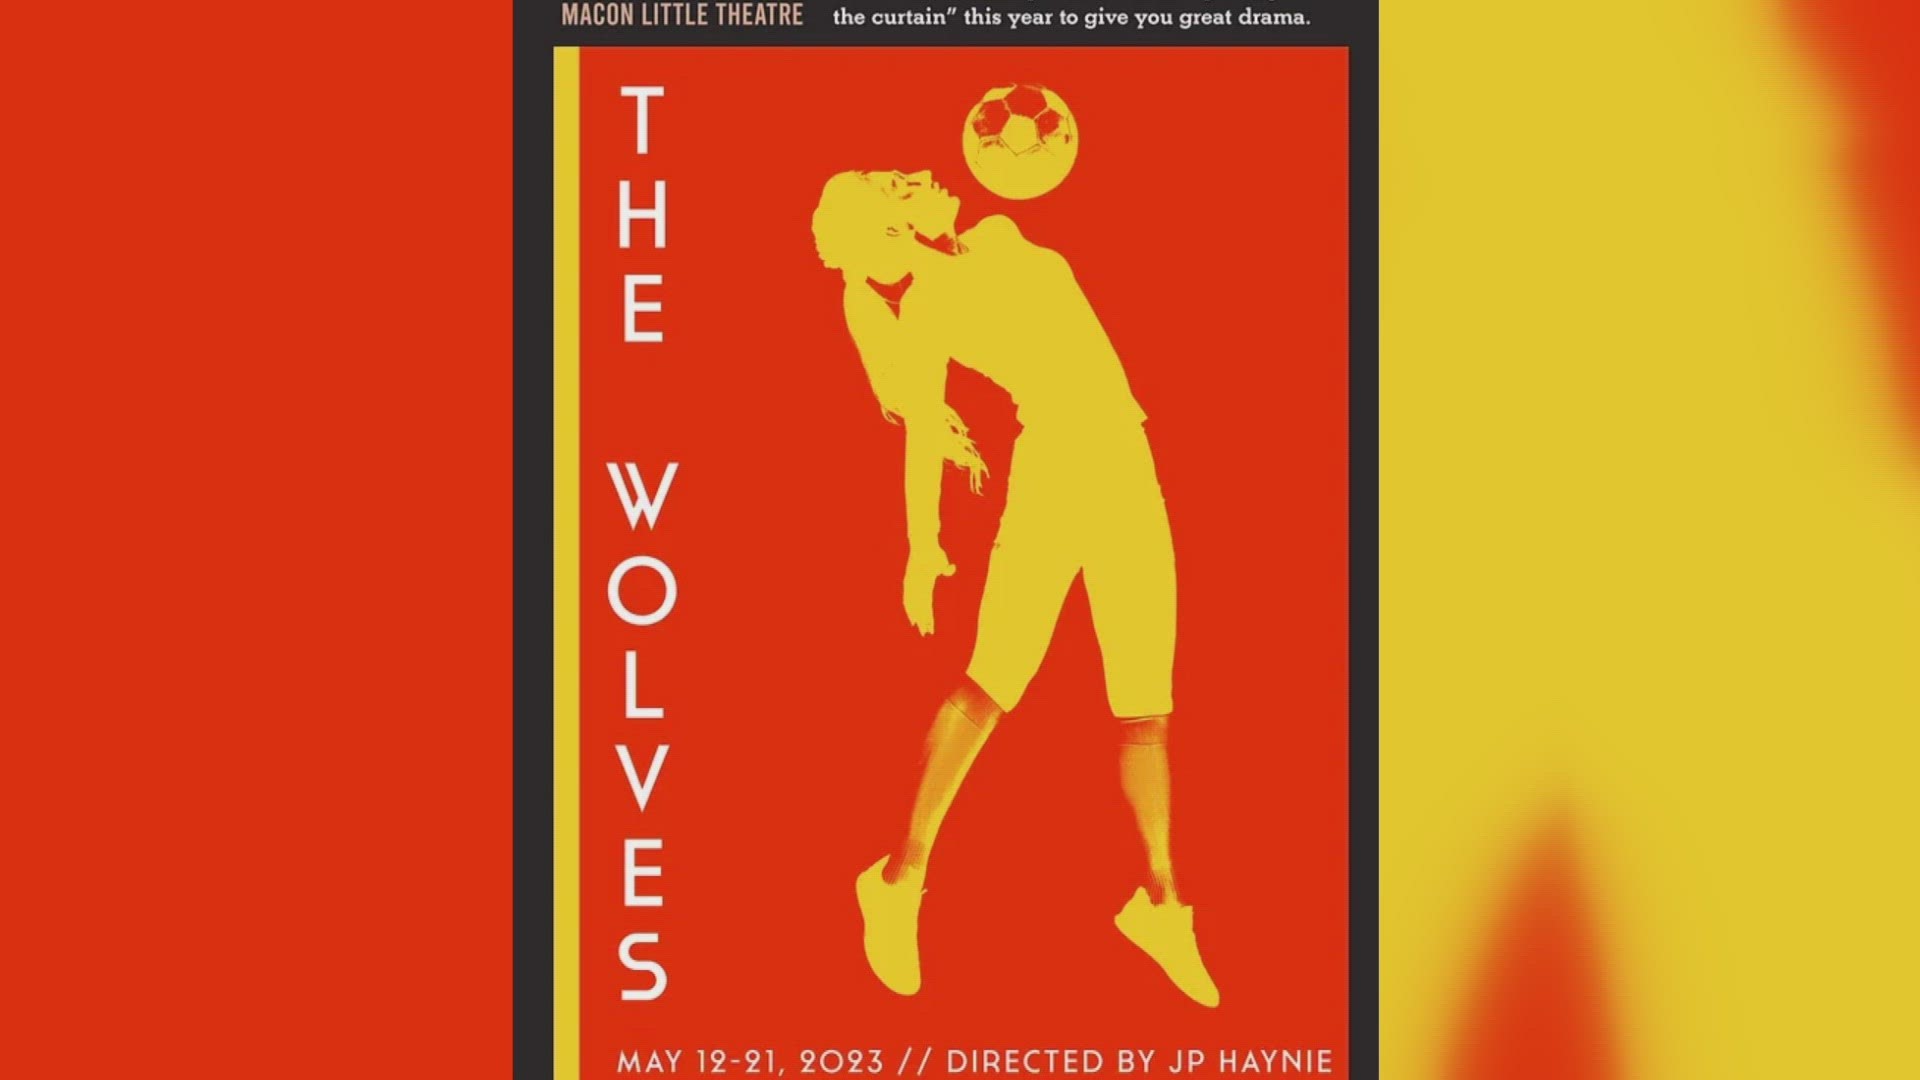 "The Wolves", written by Sarah DeLappe, is a modern slice of life story about a high school girls soccer team. During shows, you can even sit on stage.